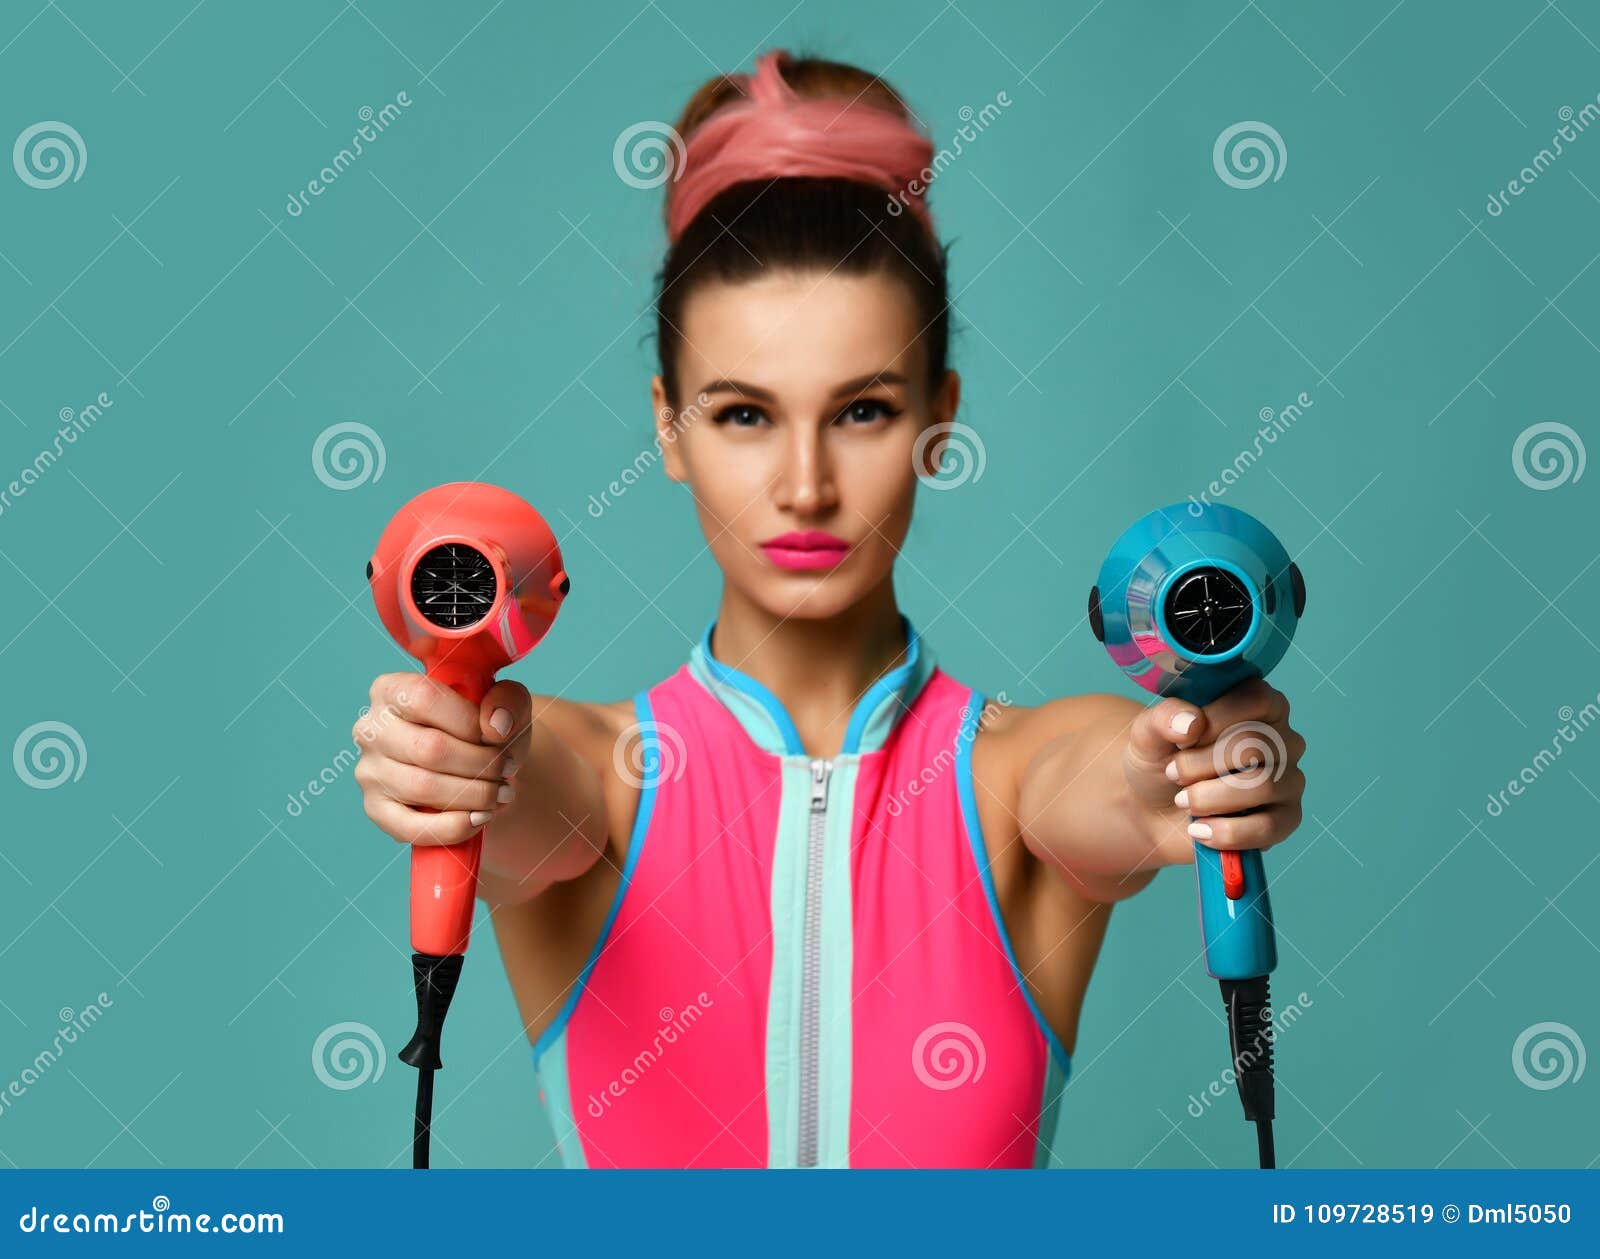 happy young brunette woman with hair dryer on blue mint background